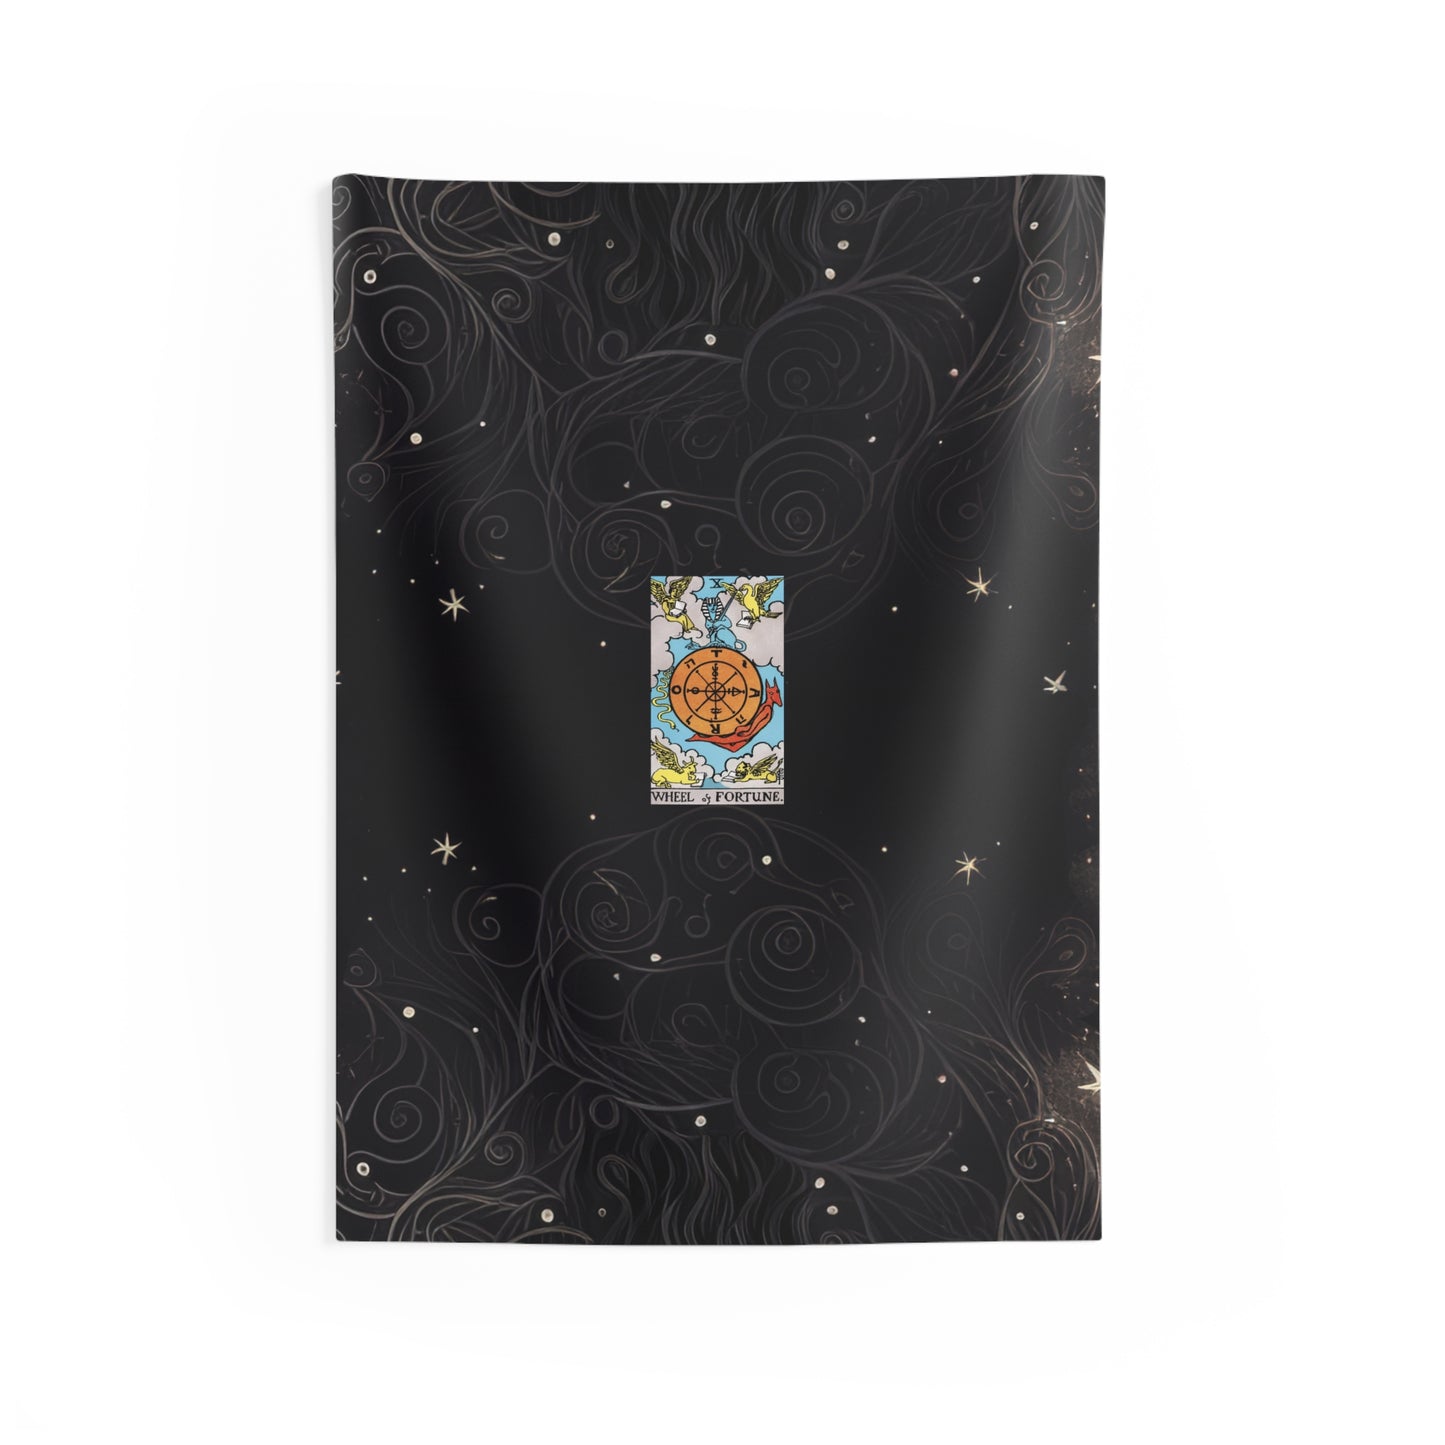 The Wheel of Fortune Tarot Card Altar Cloth or Tapestry with Starry Background